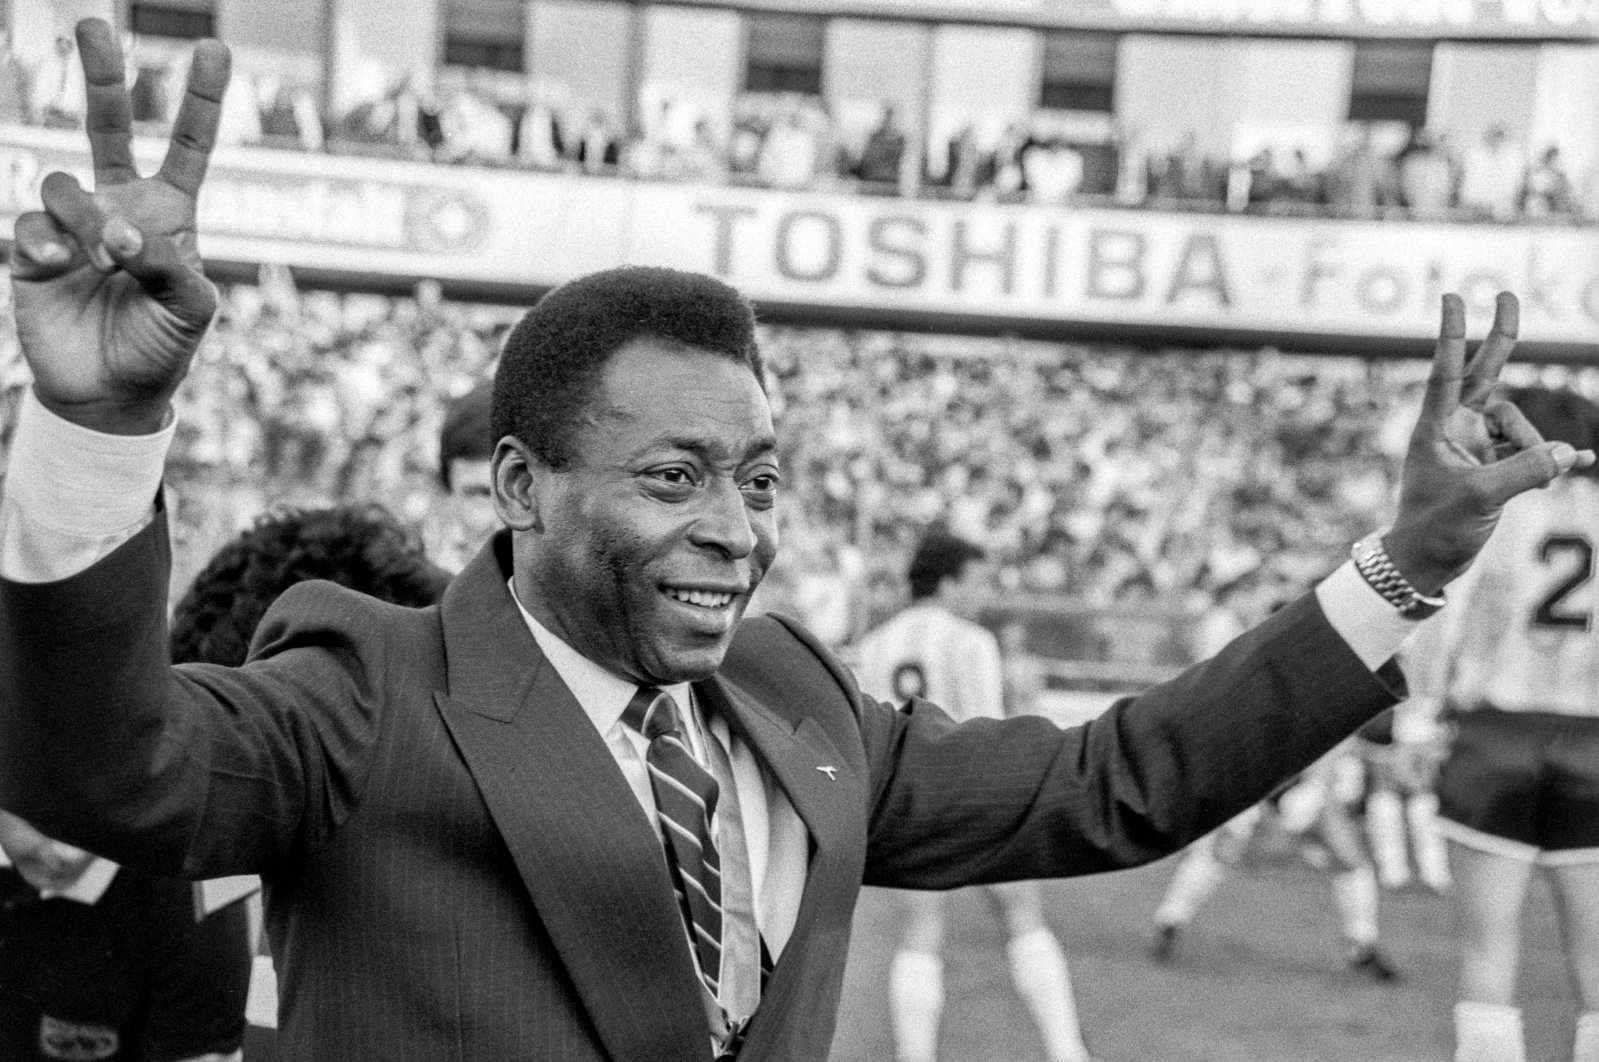 Brazilian football legend Pele is pictured during a friendly match between Italy and Argentina at Hardturm Stadium in Zurich, Switzerland, June 10, 1987. (EPA Photo)